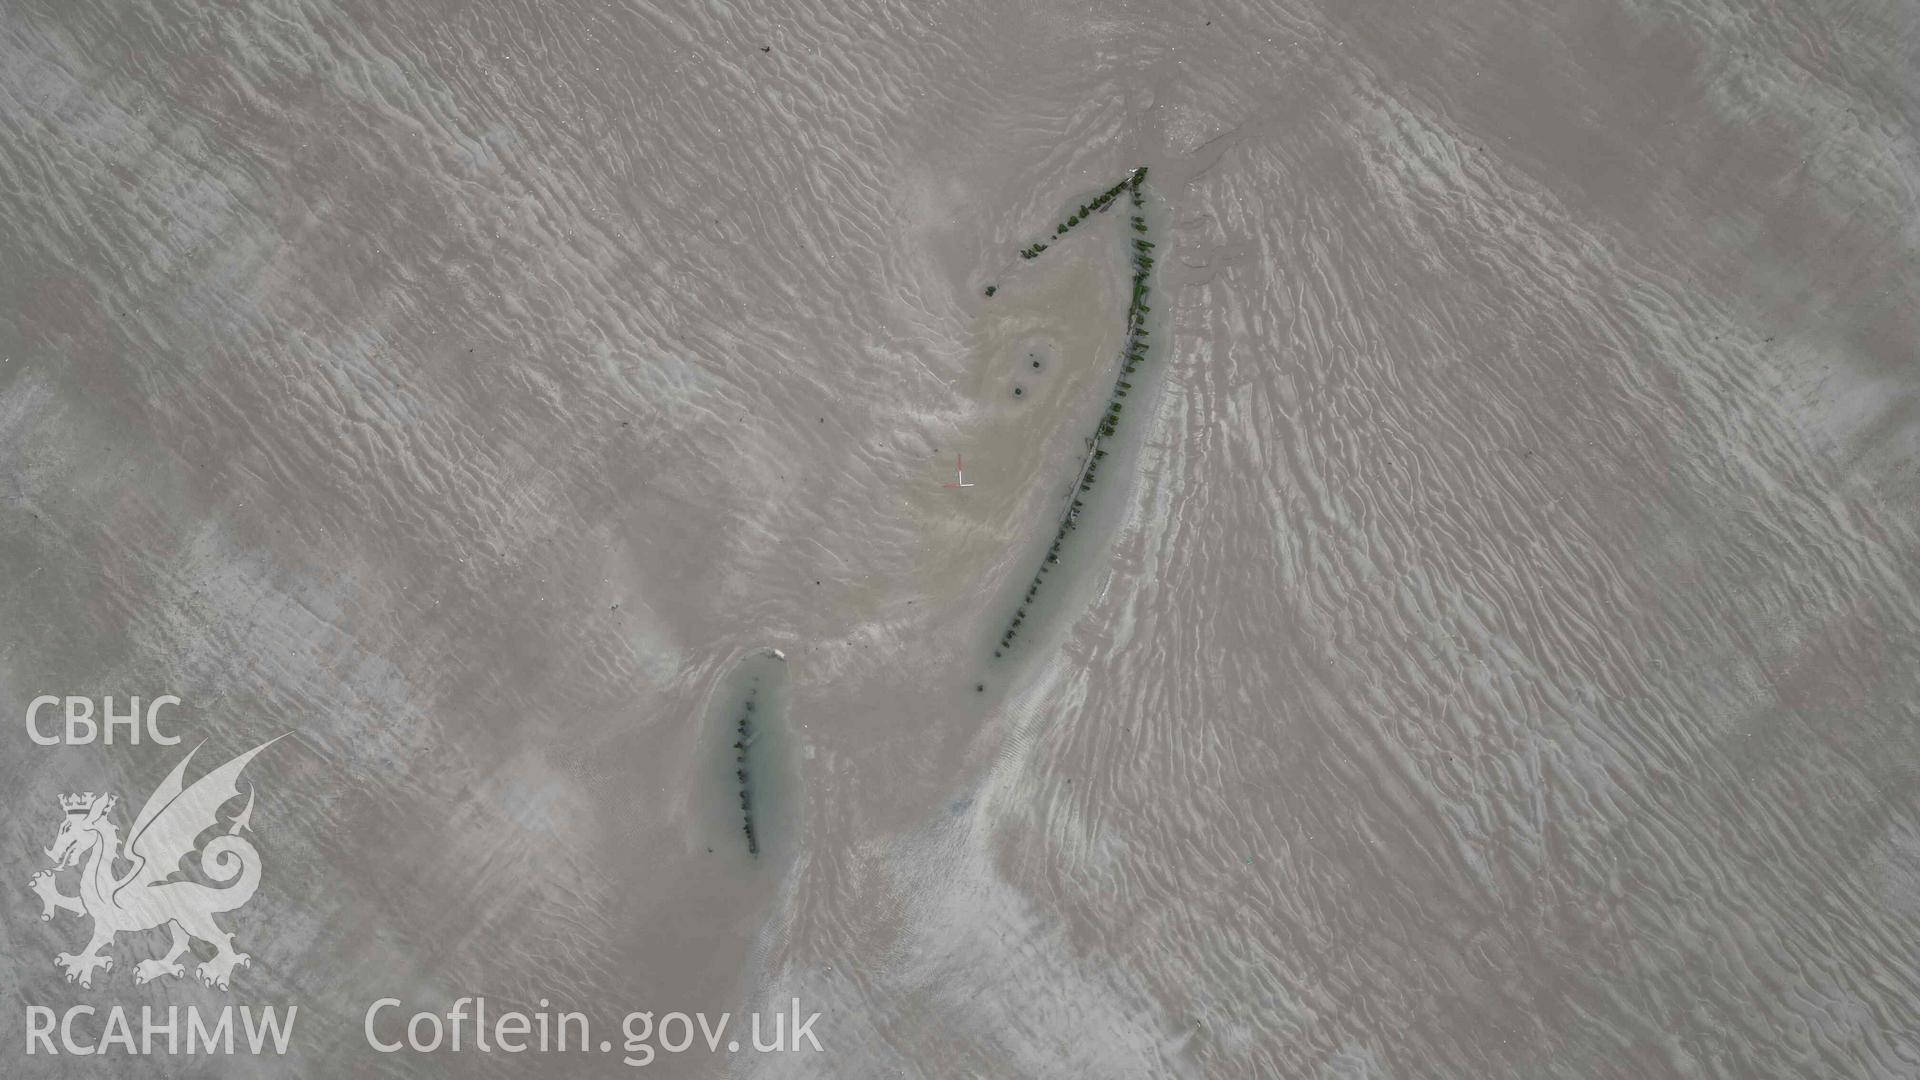 Cefn Sidan wreck 3. Overhead view taken on 21/02/2023. North is to the top, scales are 1m. The bow of the ship is to the top-right of the image.